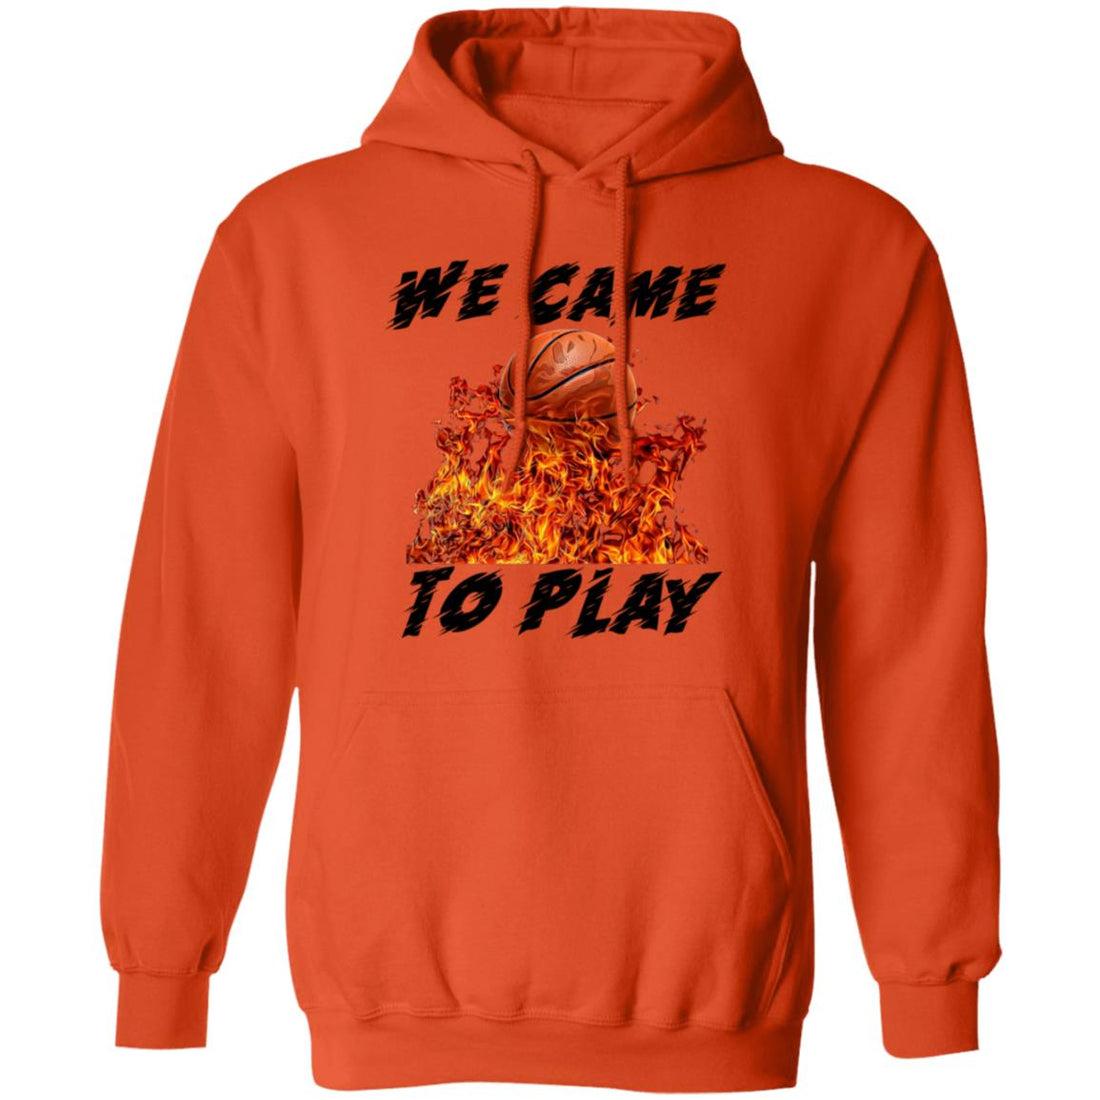 We Came To Play Basketball Pullover Hoodie - Sweatshirts - Positively Sassy - We Came To Play Basketball Pullover Hoodie